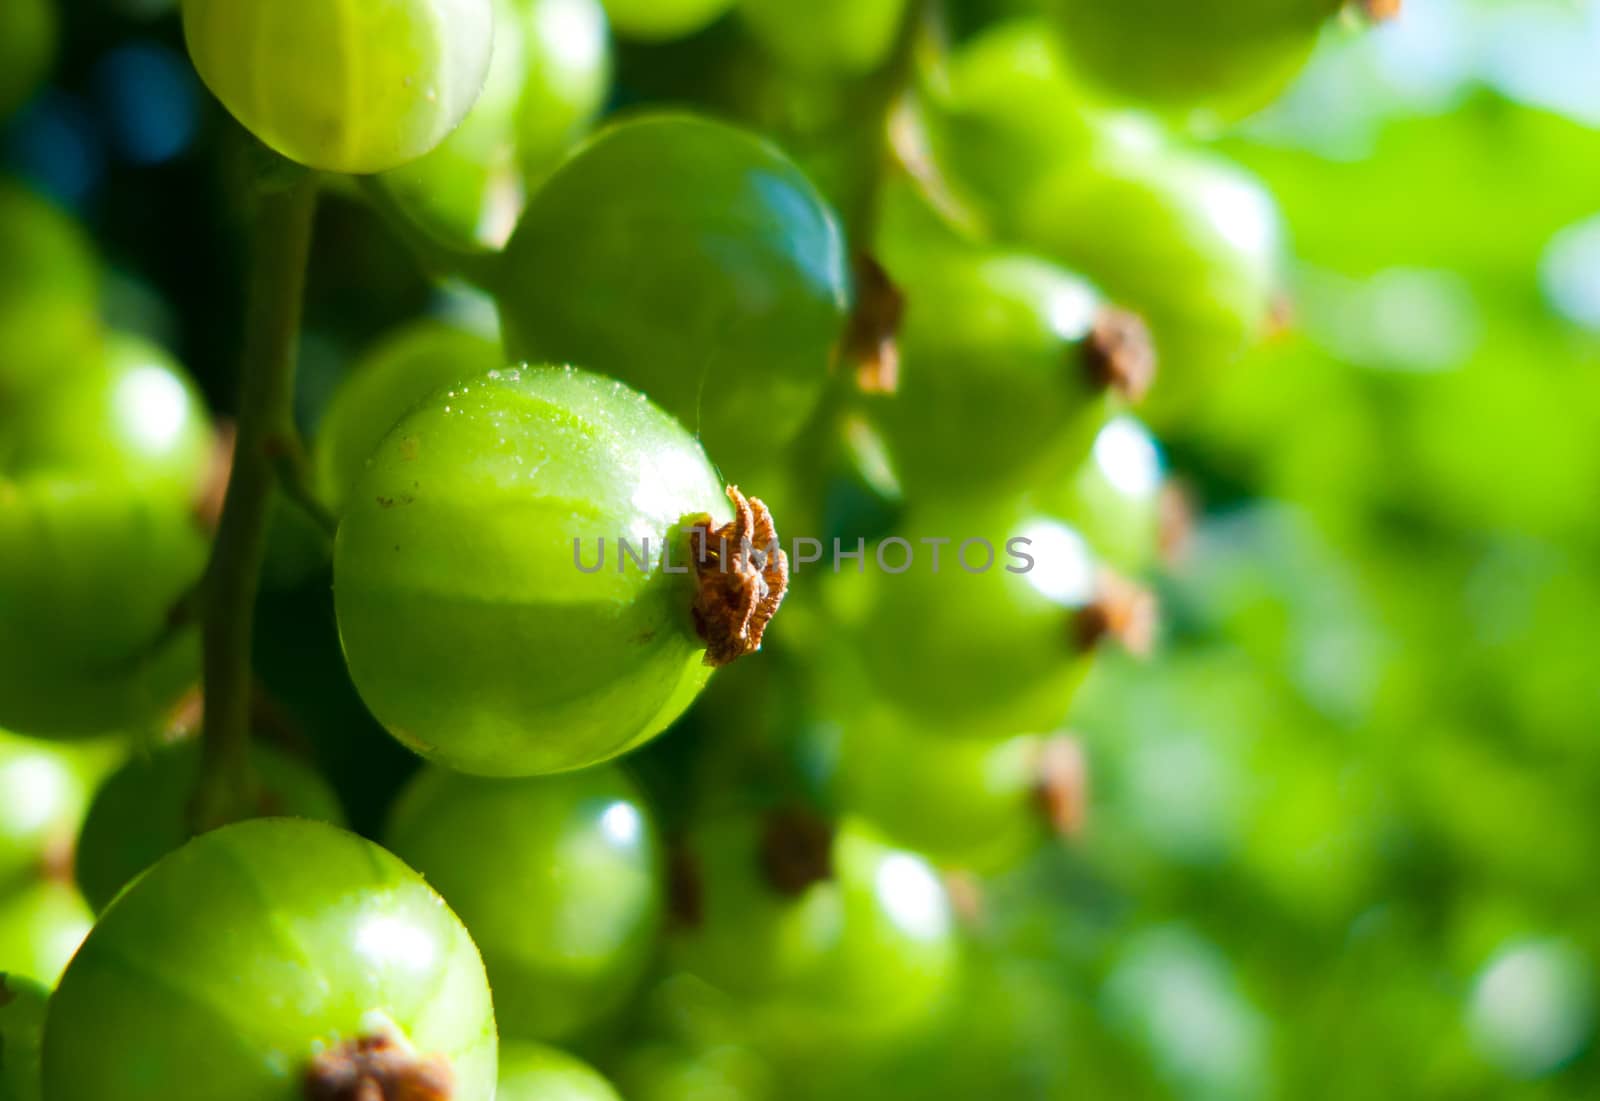 green currant by anobis